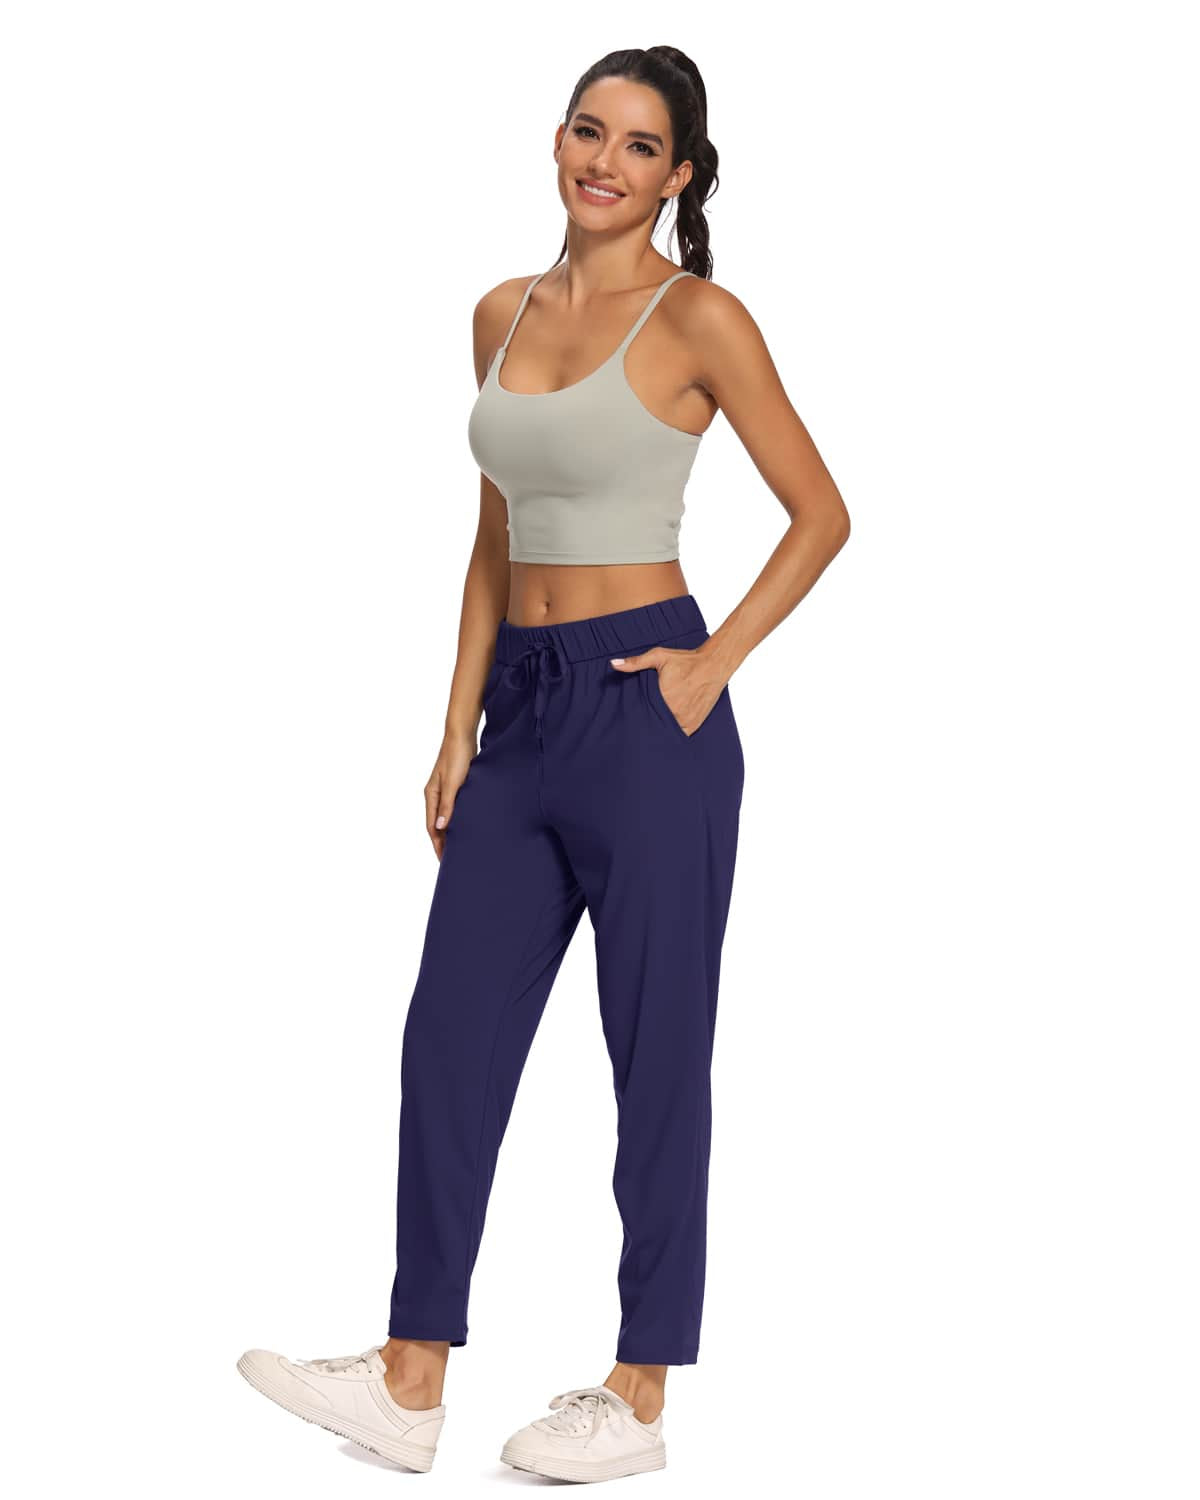 Women's Casual Stretch Pants 7/8 Length